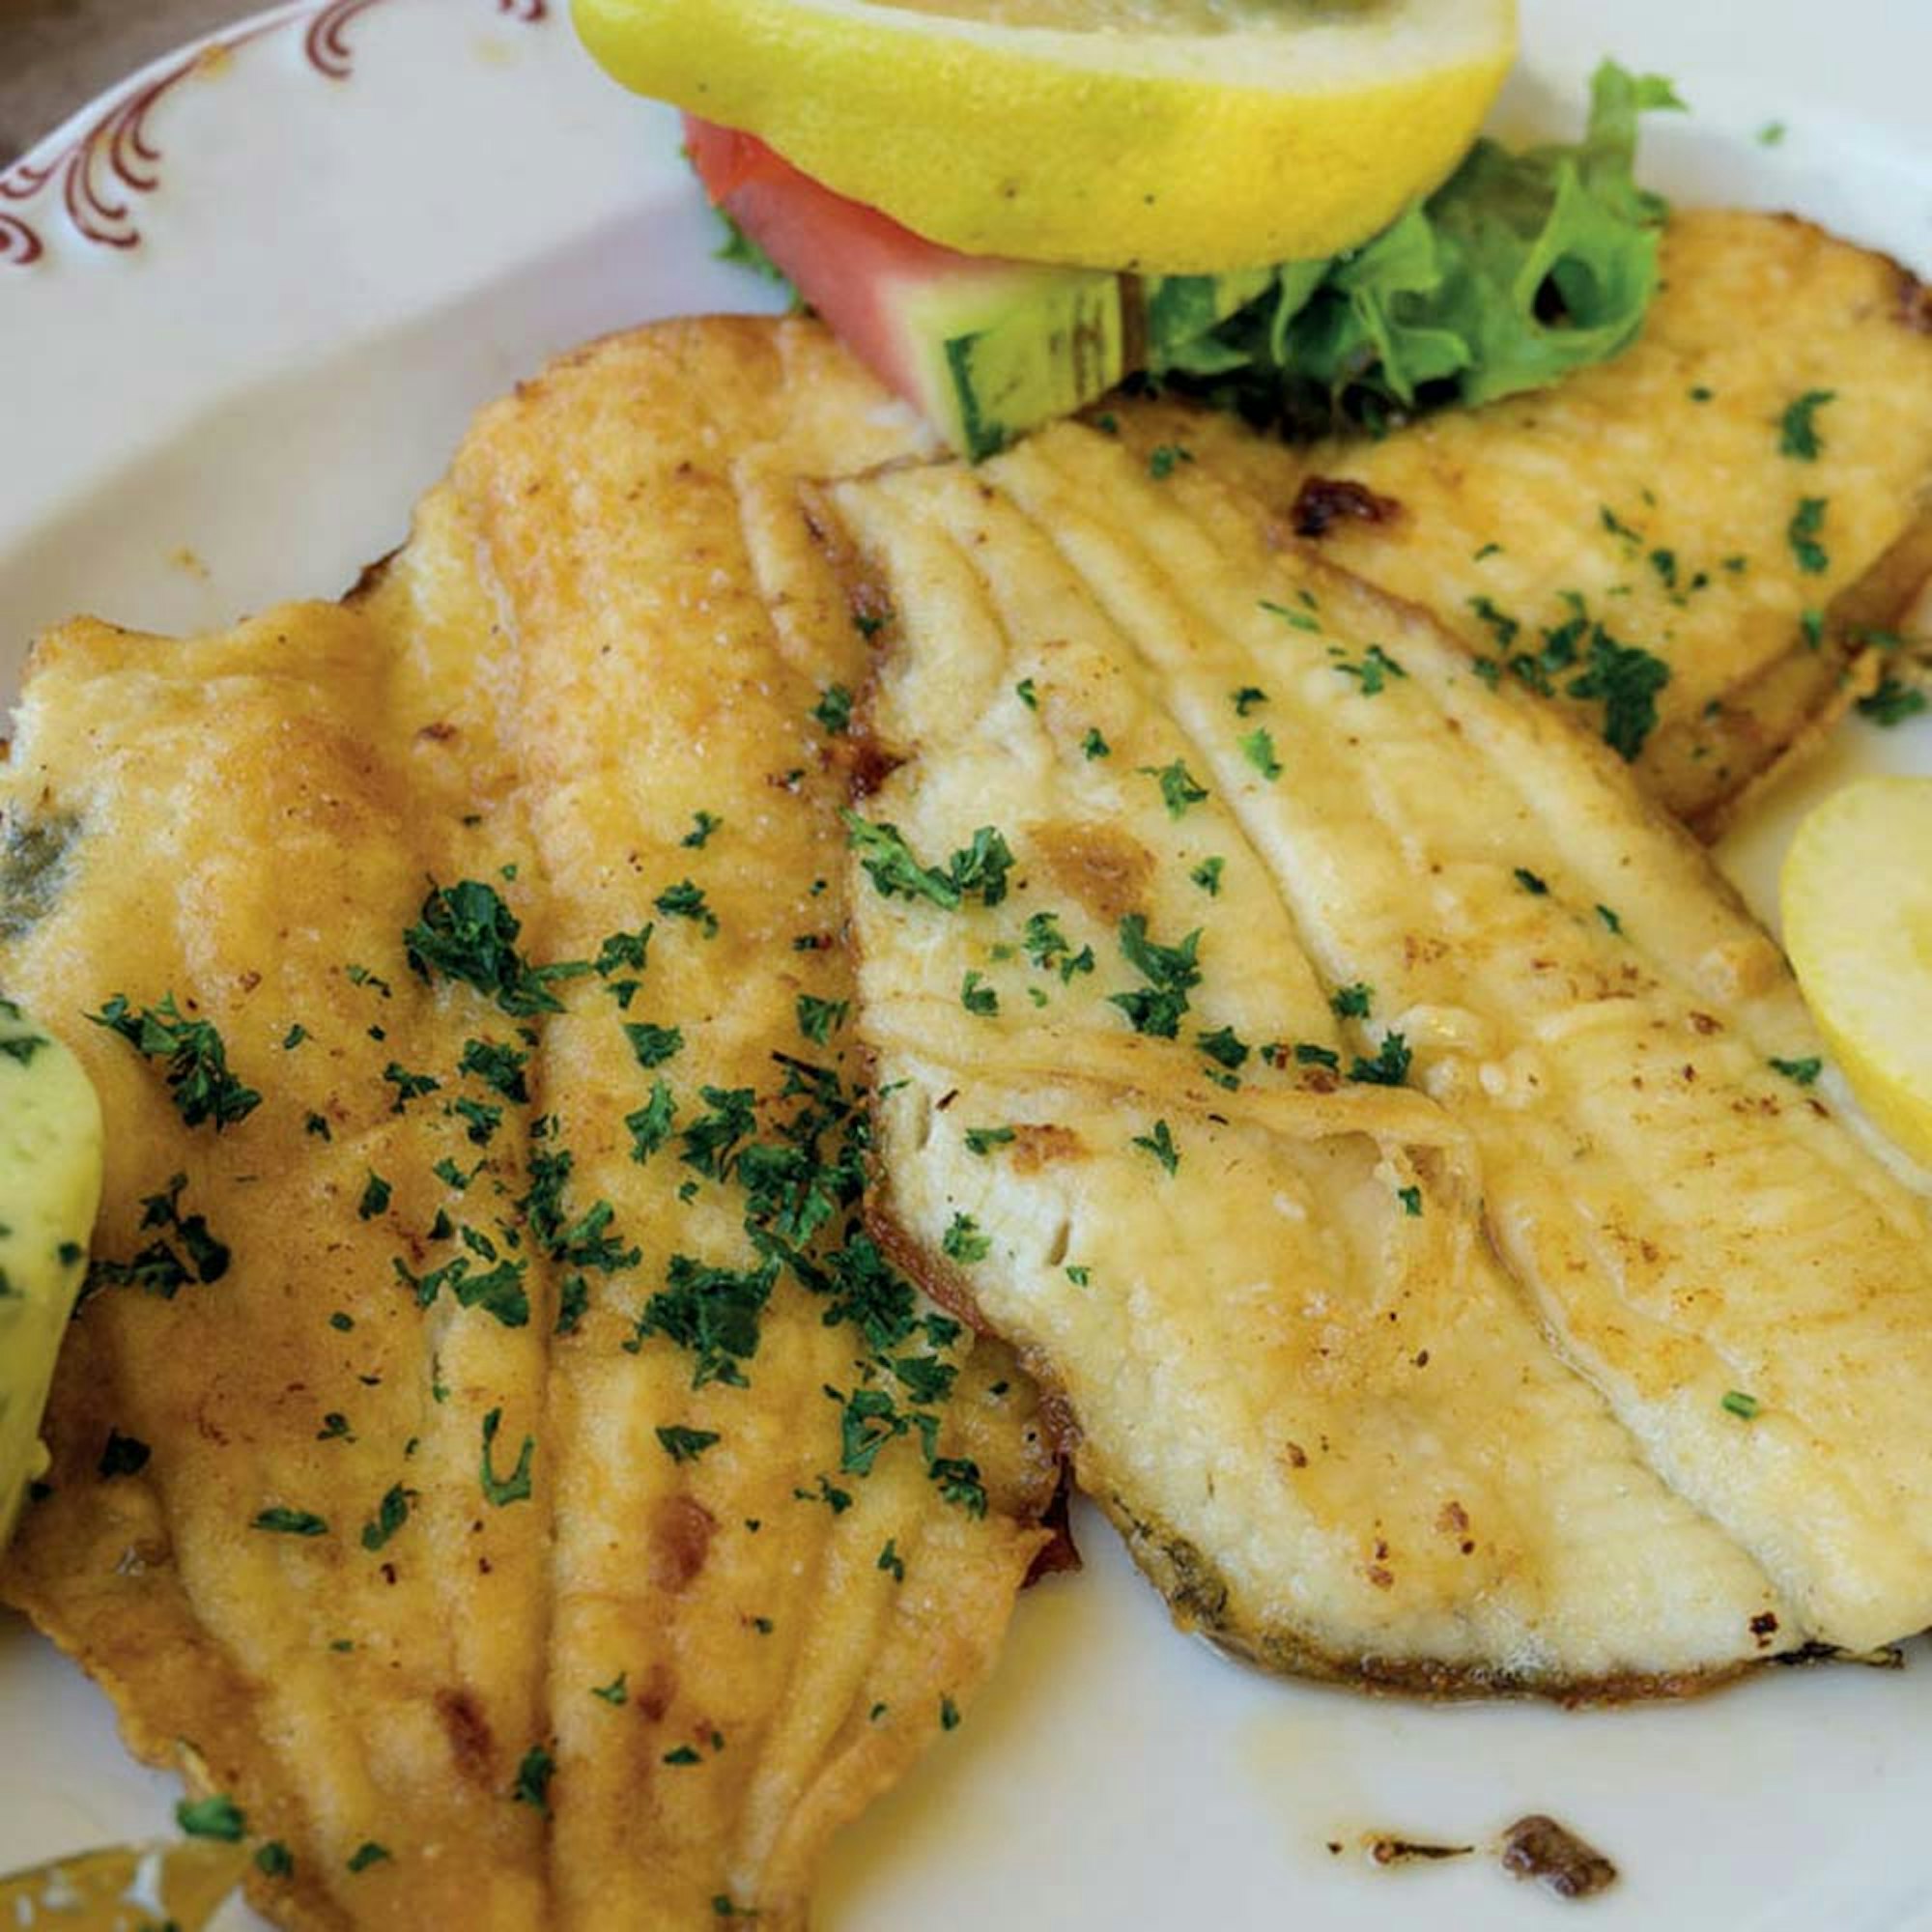 Air fryer Roasted Snapper with Lemon, Caper, and Anchovy Butter recipe | Robins Kitchen blog